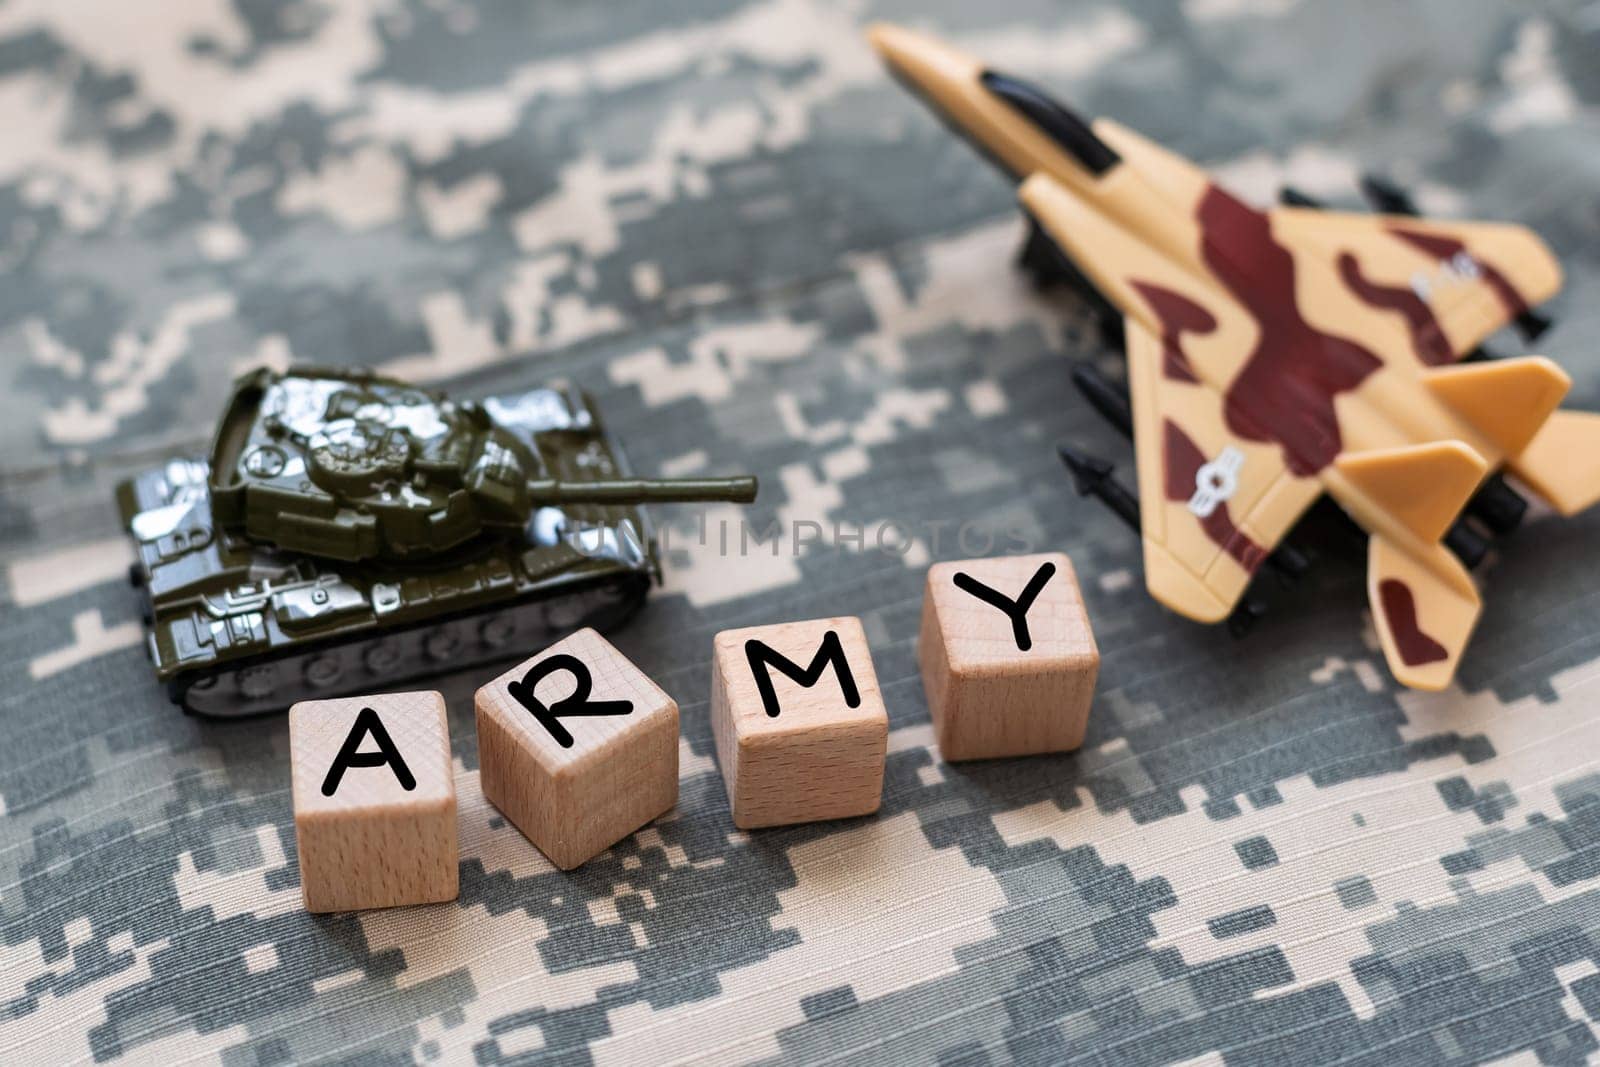 ARMY concept on camouflage uniform by Andelov13